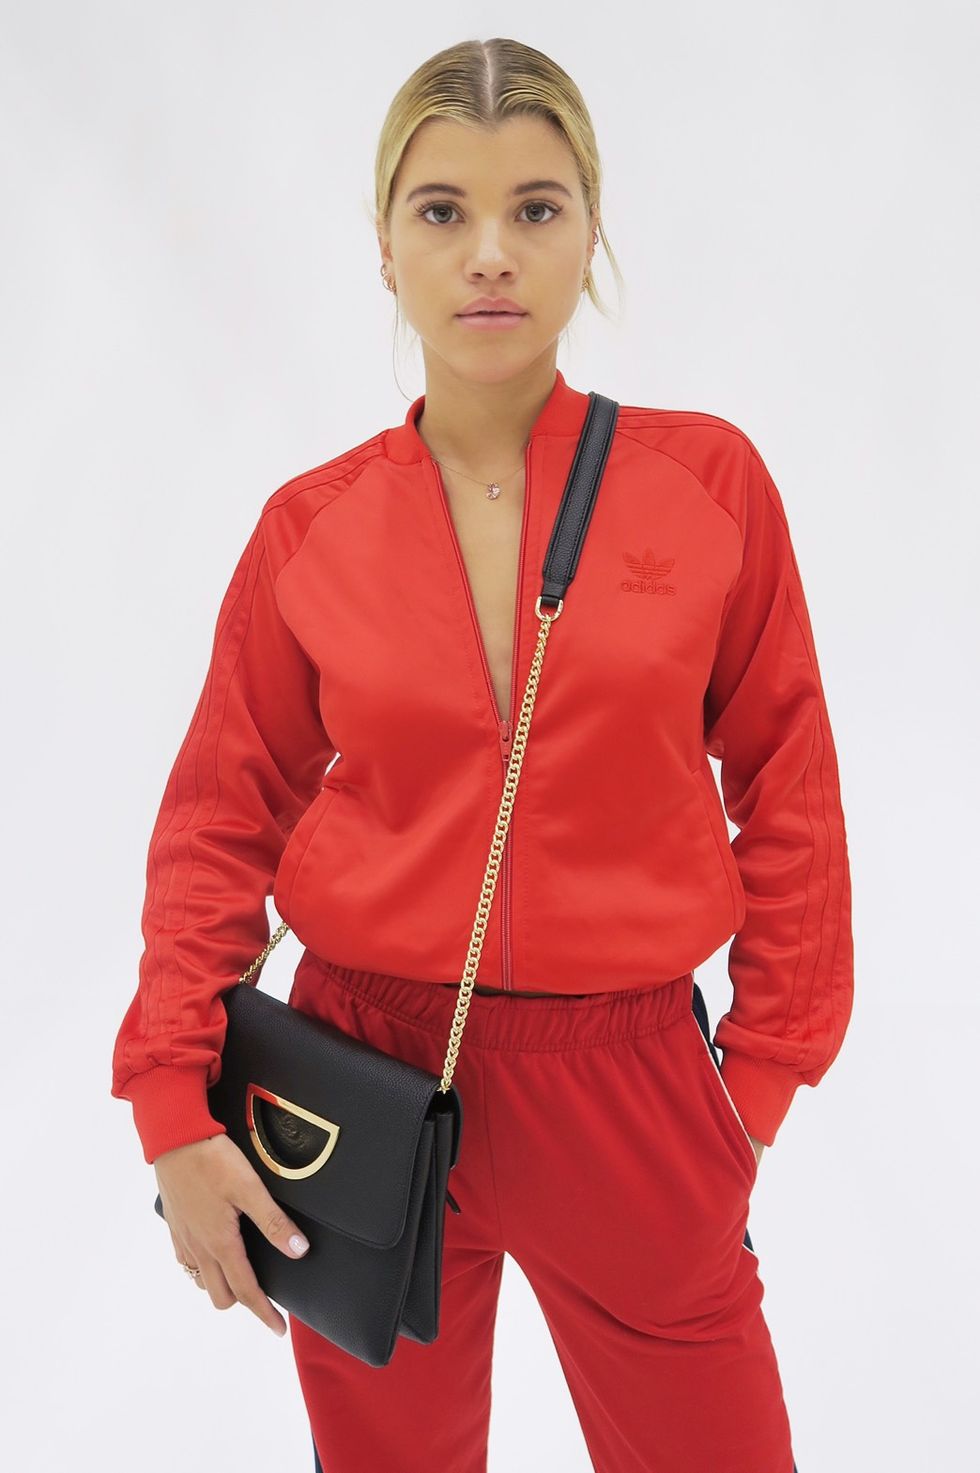 Clothing, Red, Waist, Sleeve, Outerwear, Orange, Neck, Shoulder, Trousers, Top, 